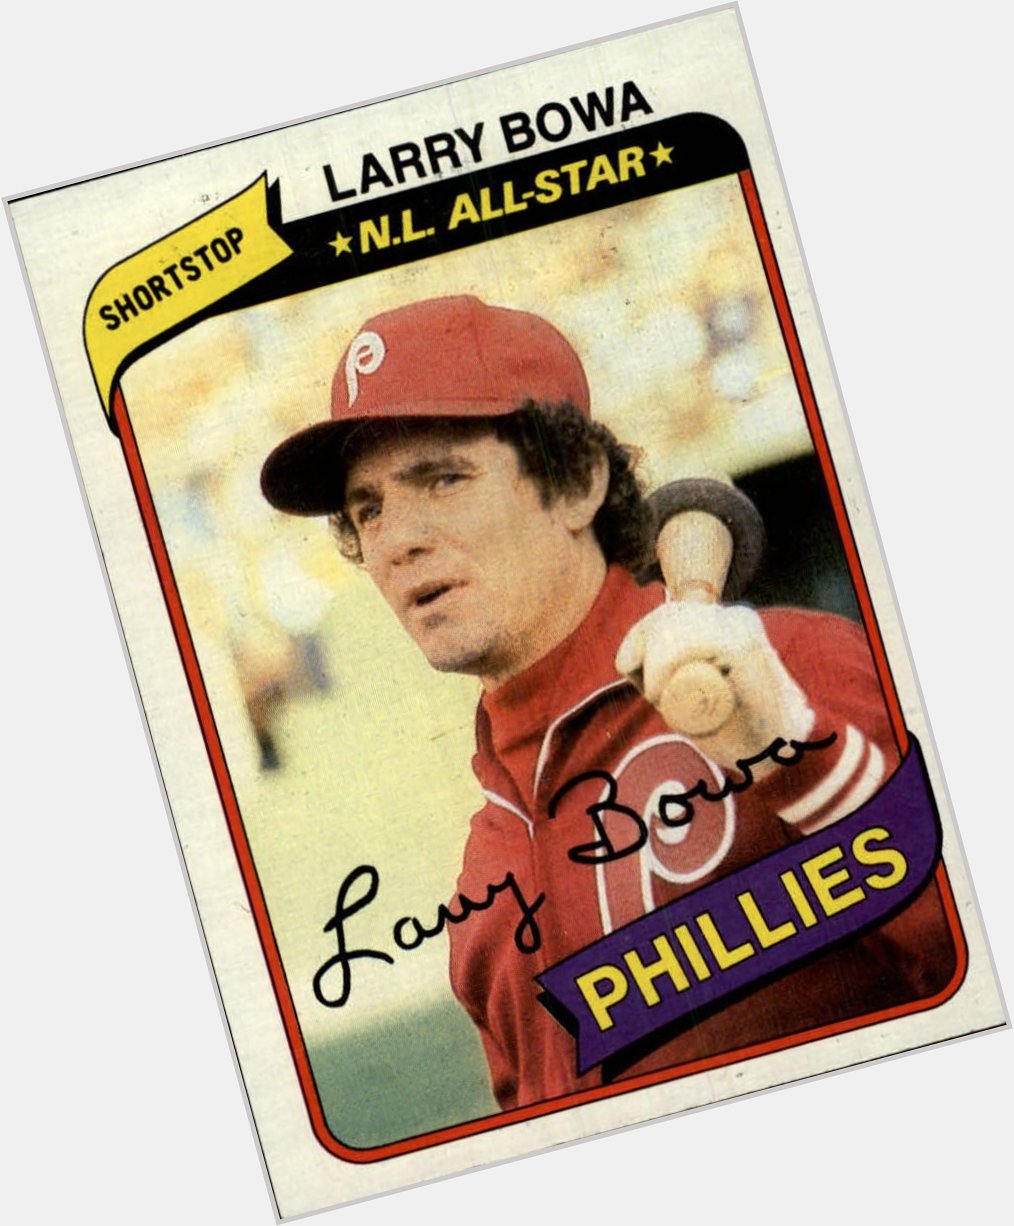 Happy 80\s Birthday to Phillies shortstop Larry Bowa, who hit .375 in the 1980 World Series. 